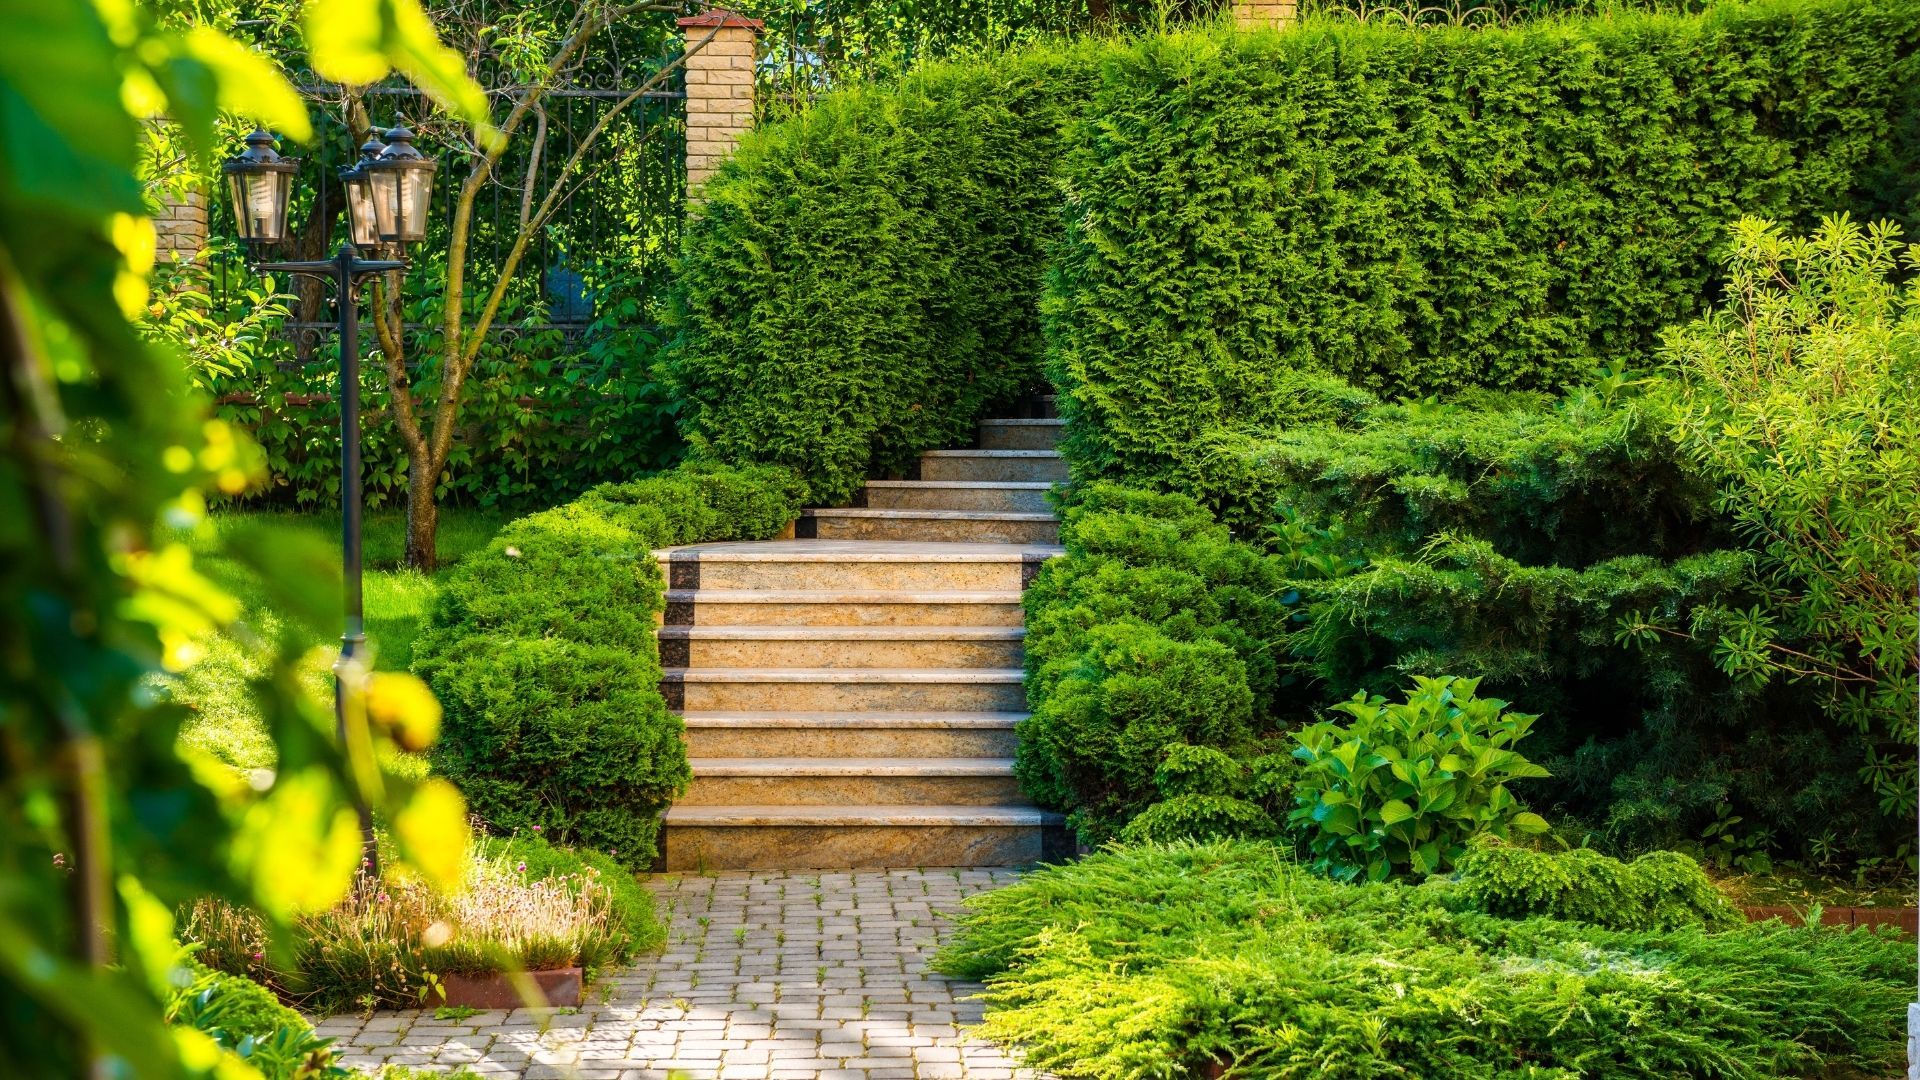 Nice landscaped stairs and trimmed hedges